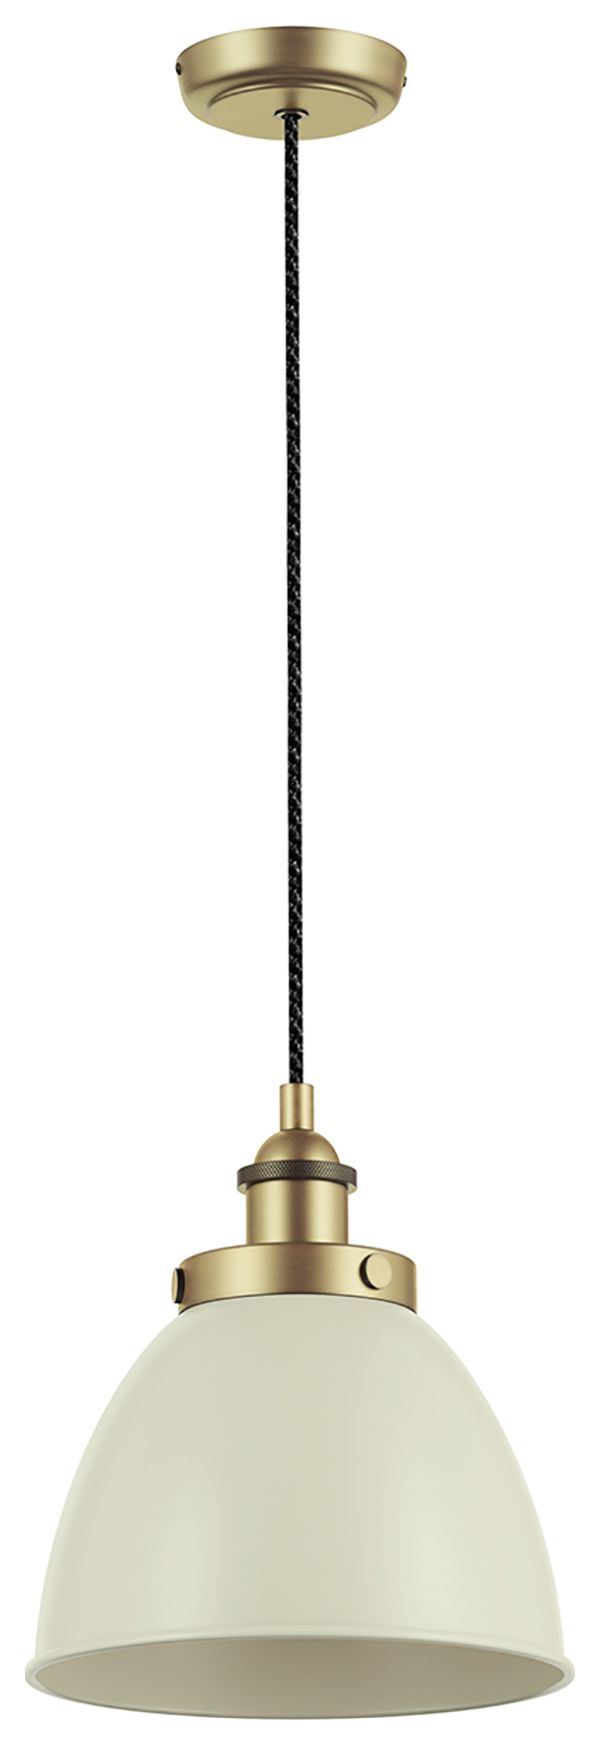 Image of Franklin Pendant Light Taupe and Brass